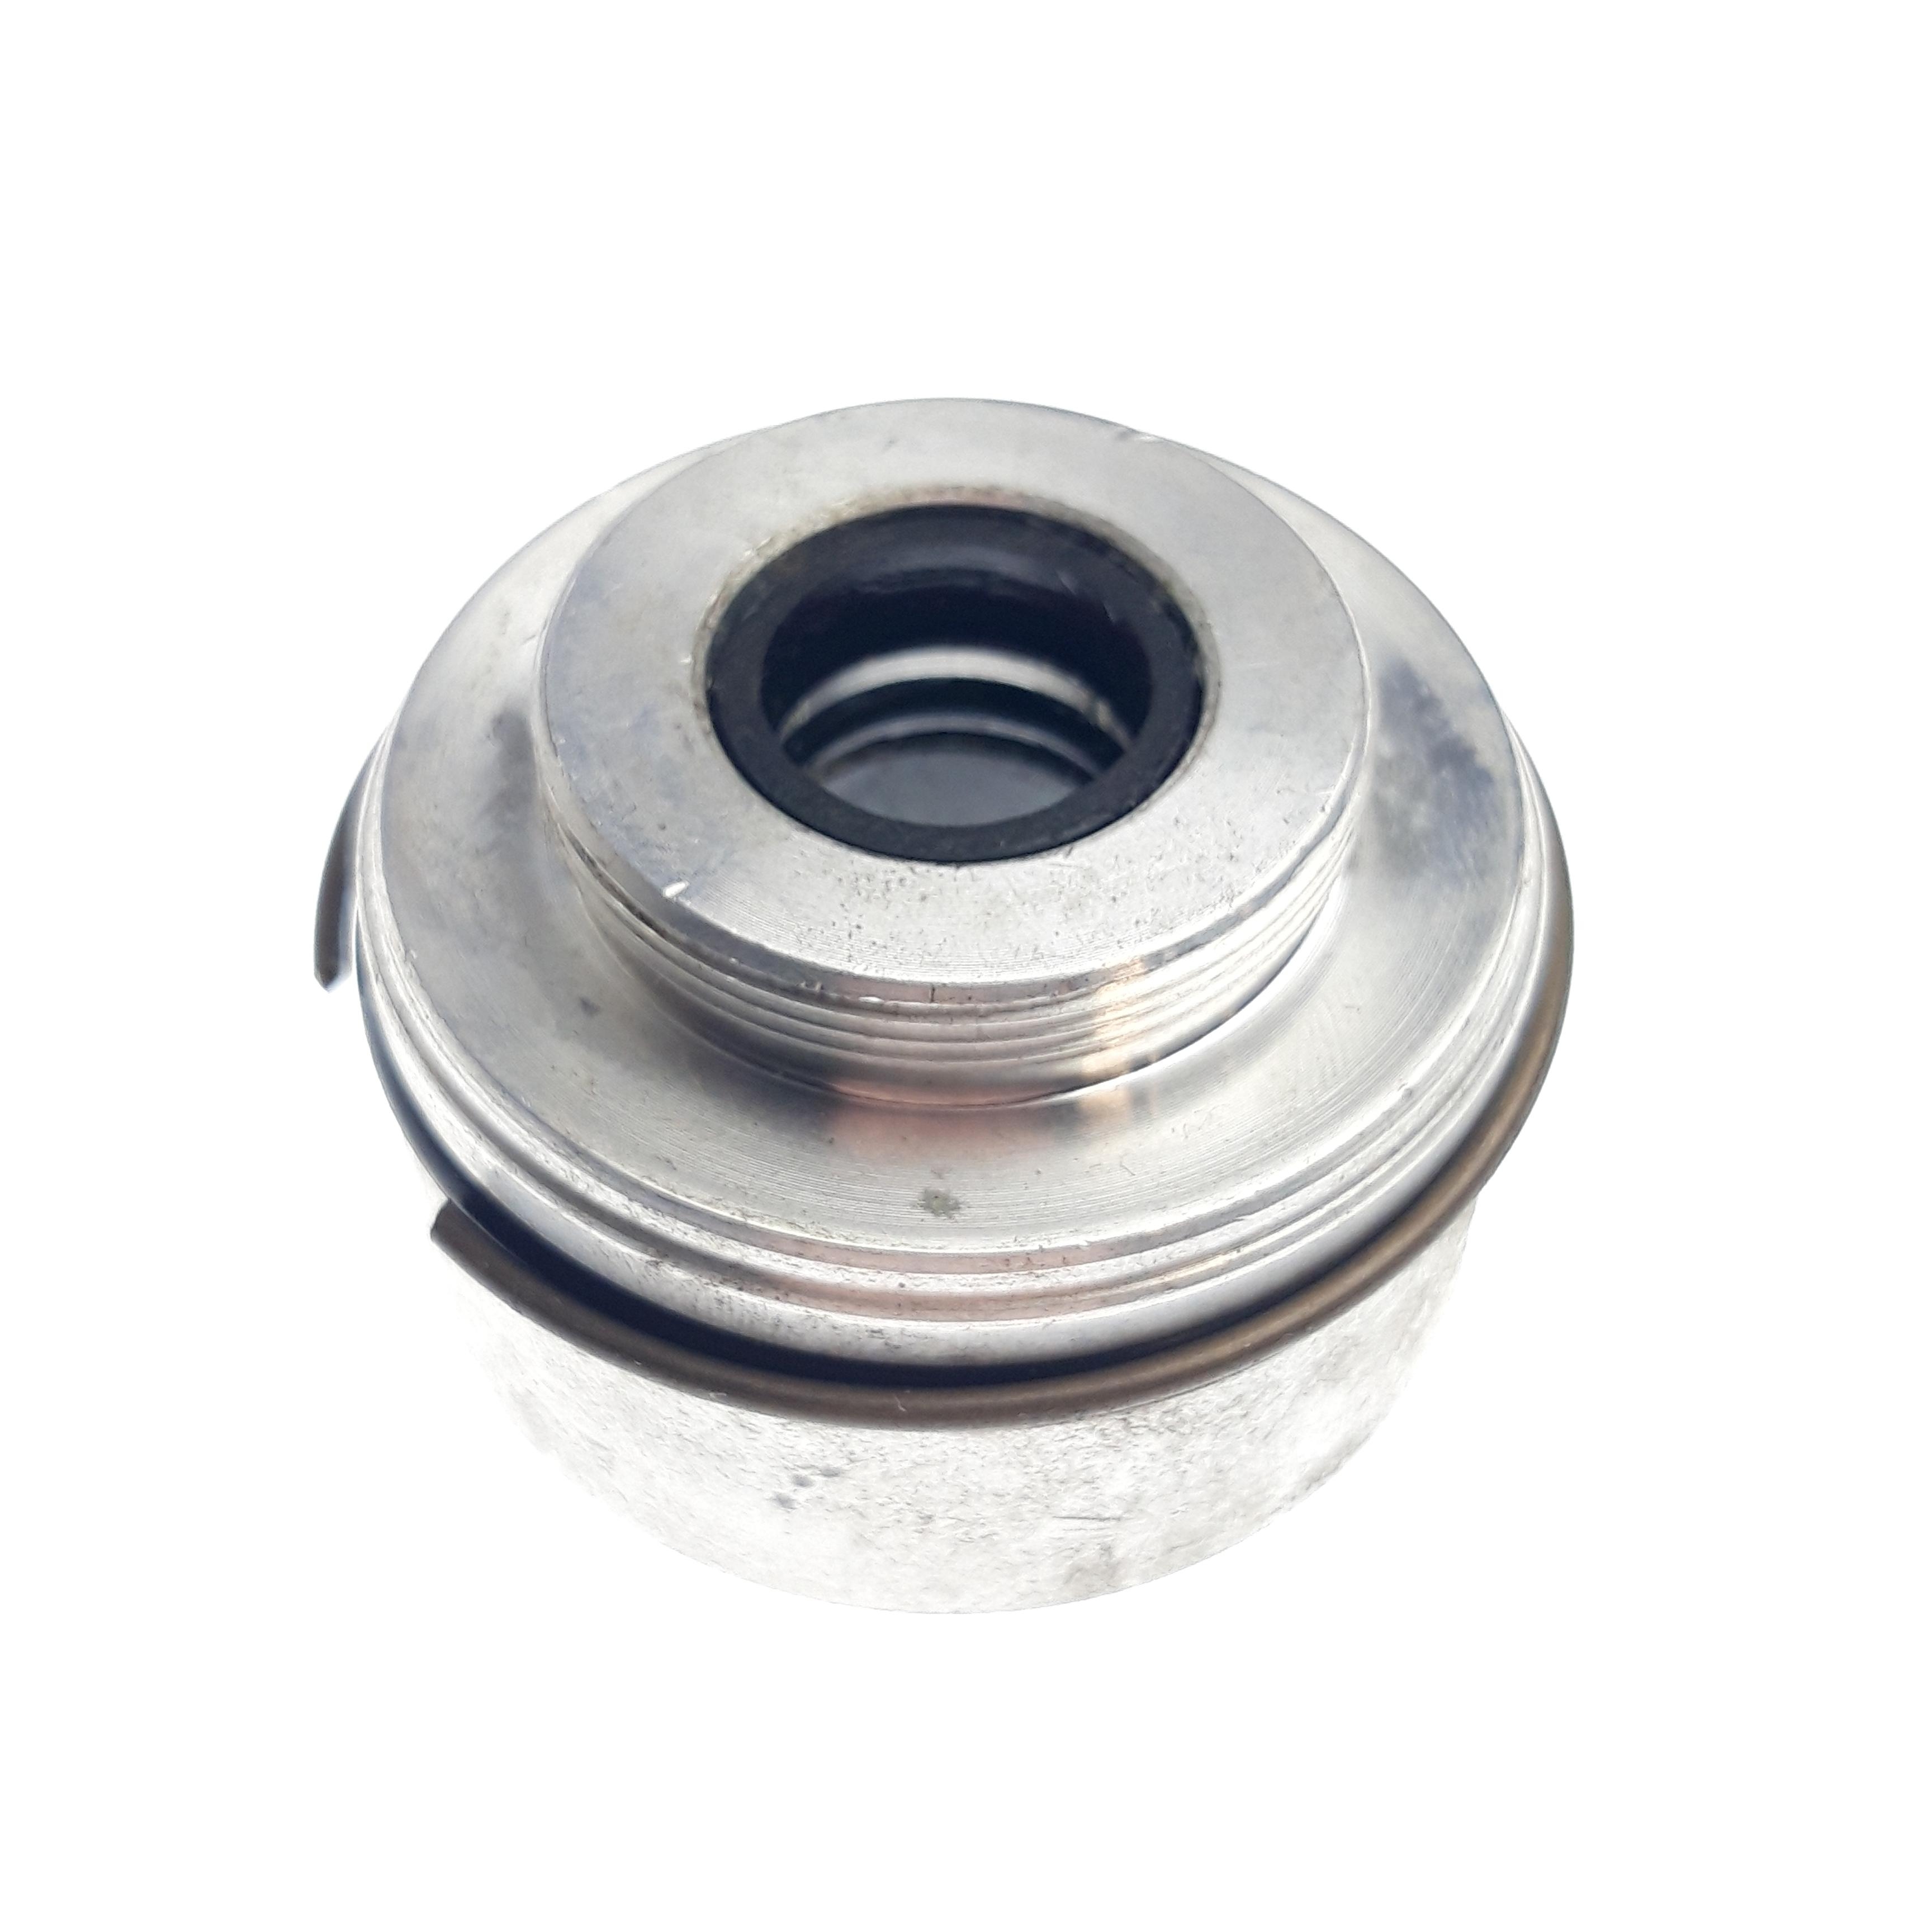 Bearing Assembly: (1.834 Bore, 0.620 Shaft, 1.200 TLG) w/Threads, including retaining ring